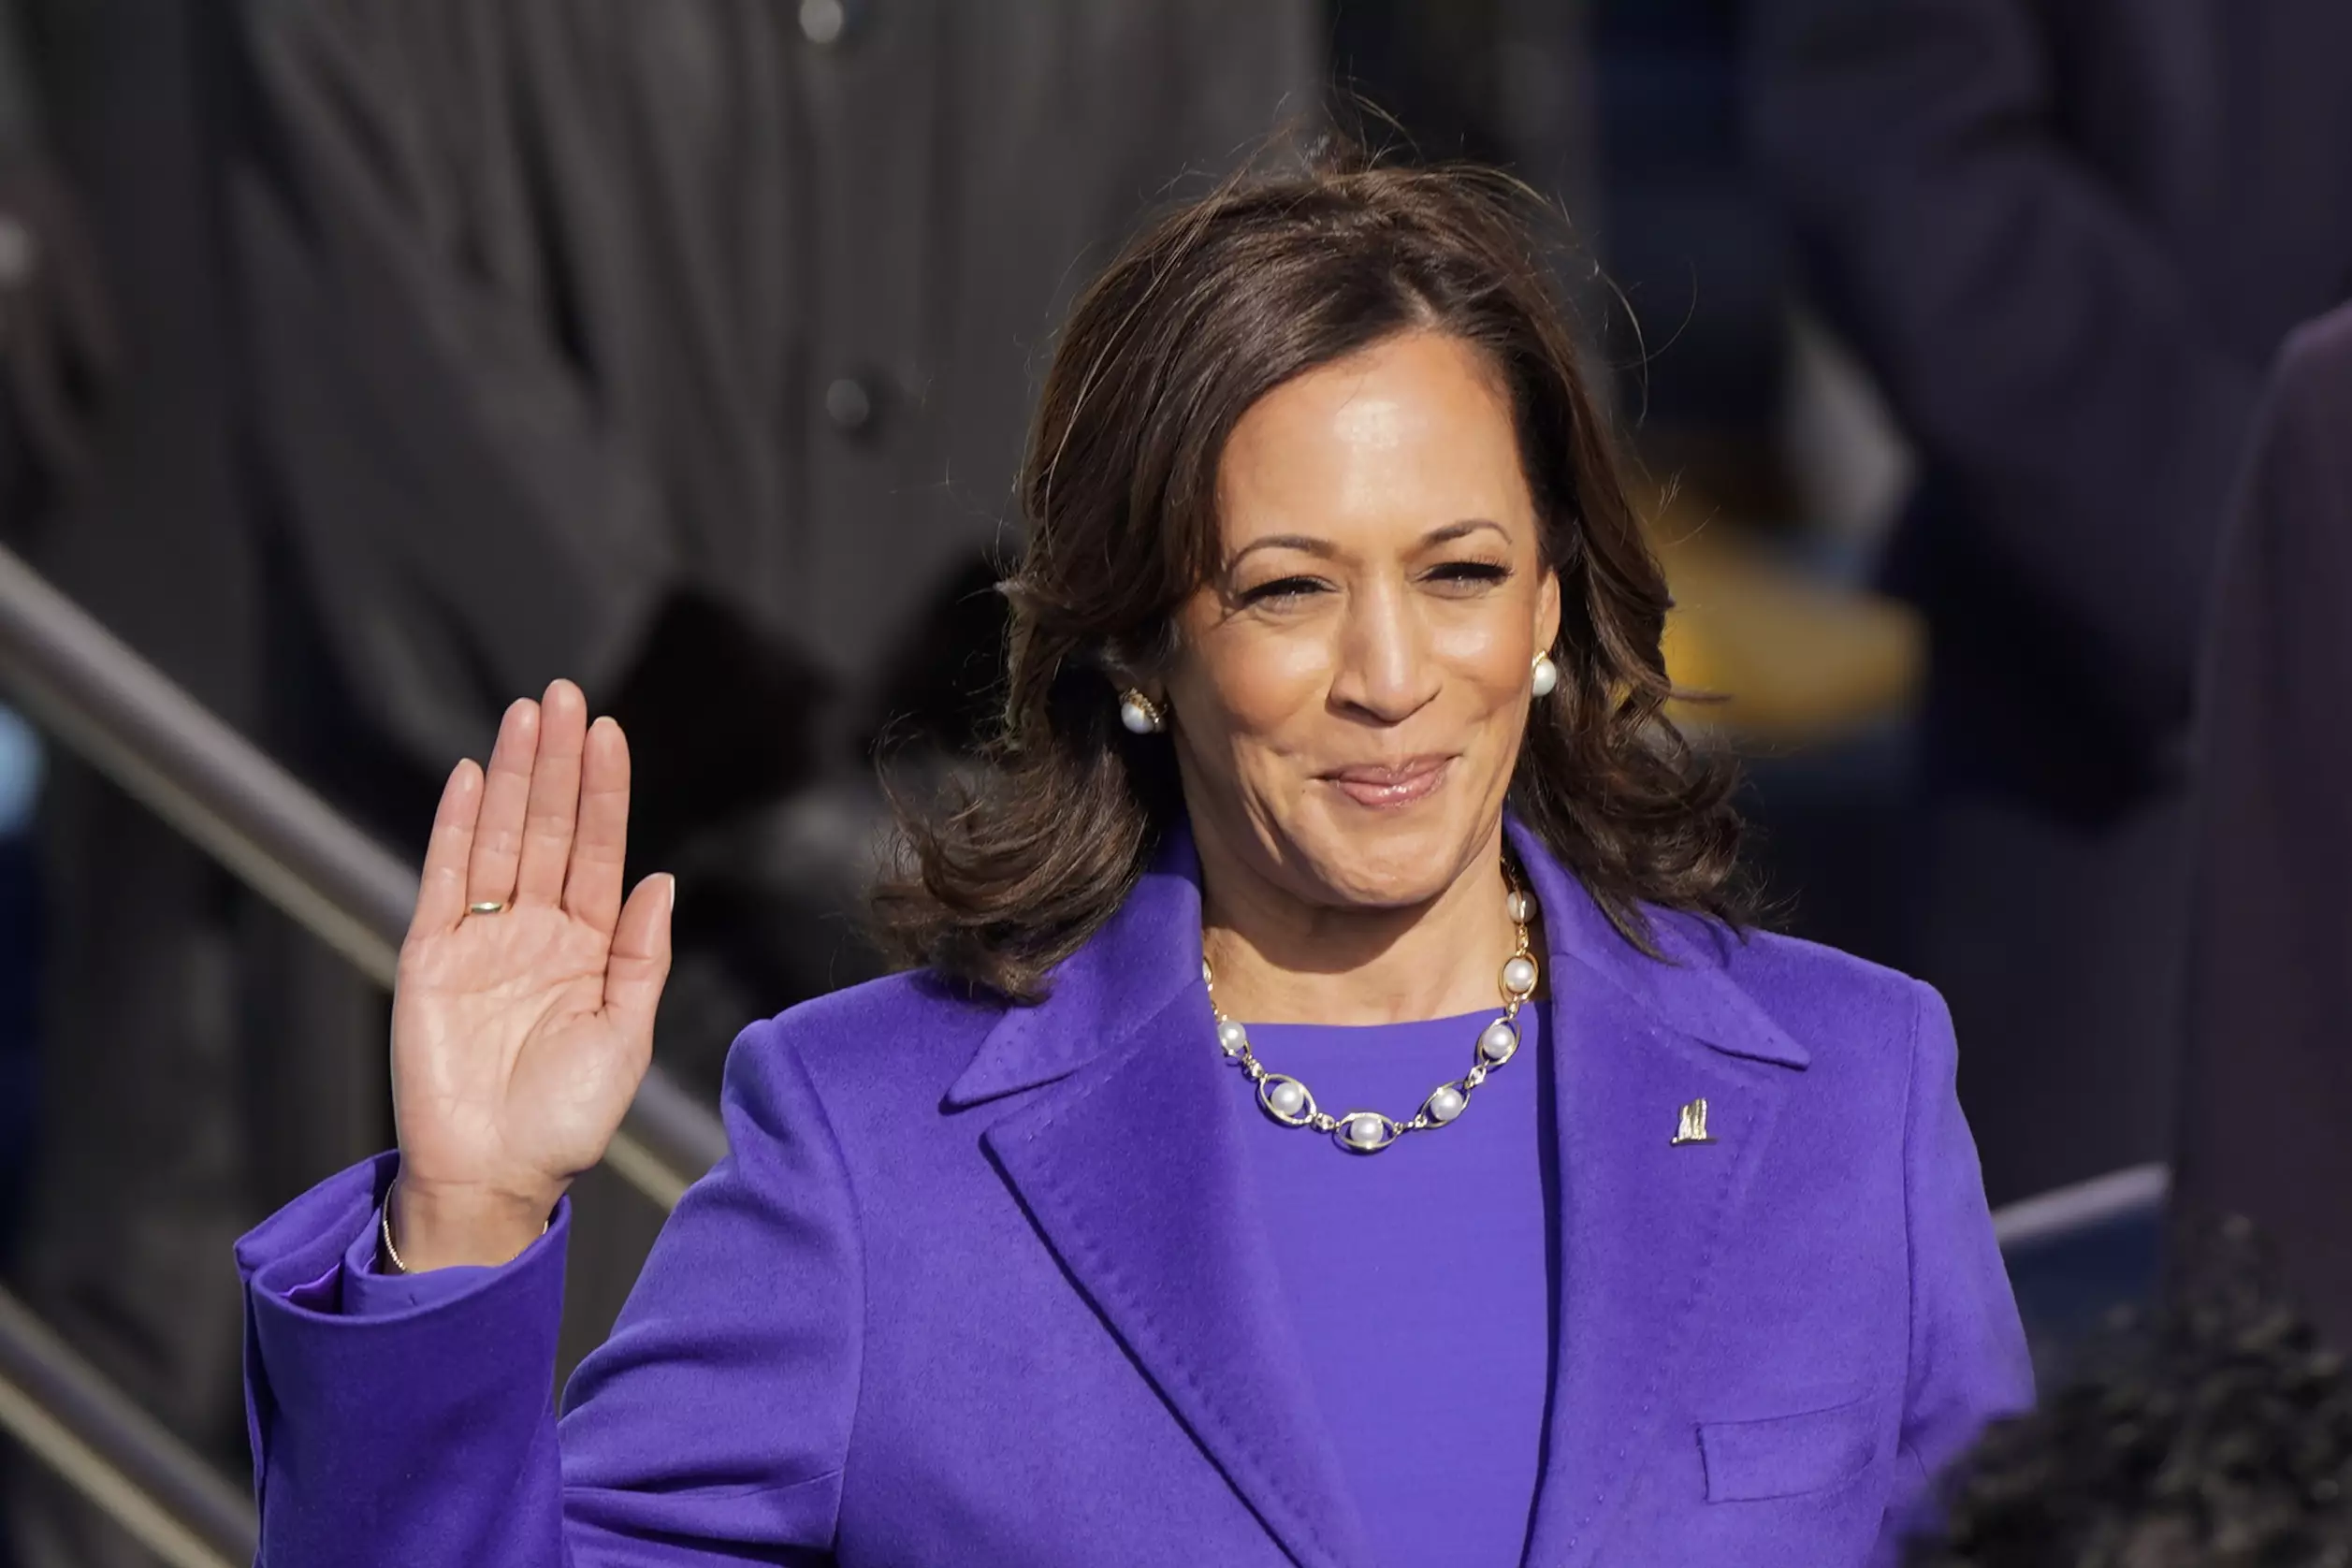 Kamala Harris was sworn in as vice president by Supreme Court Justice Sonia Sotomayor on Wednesday (